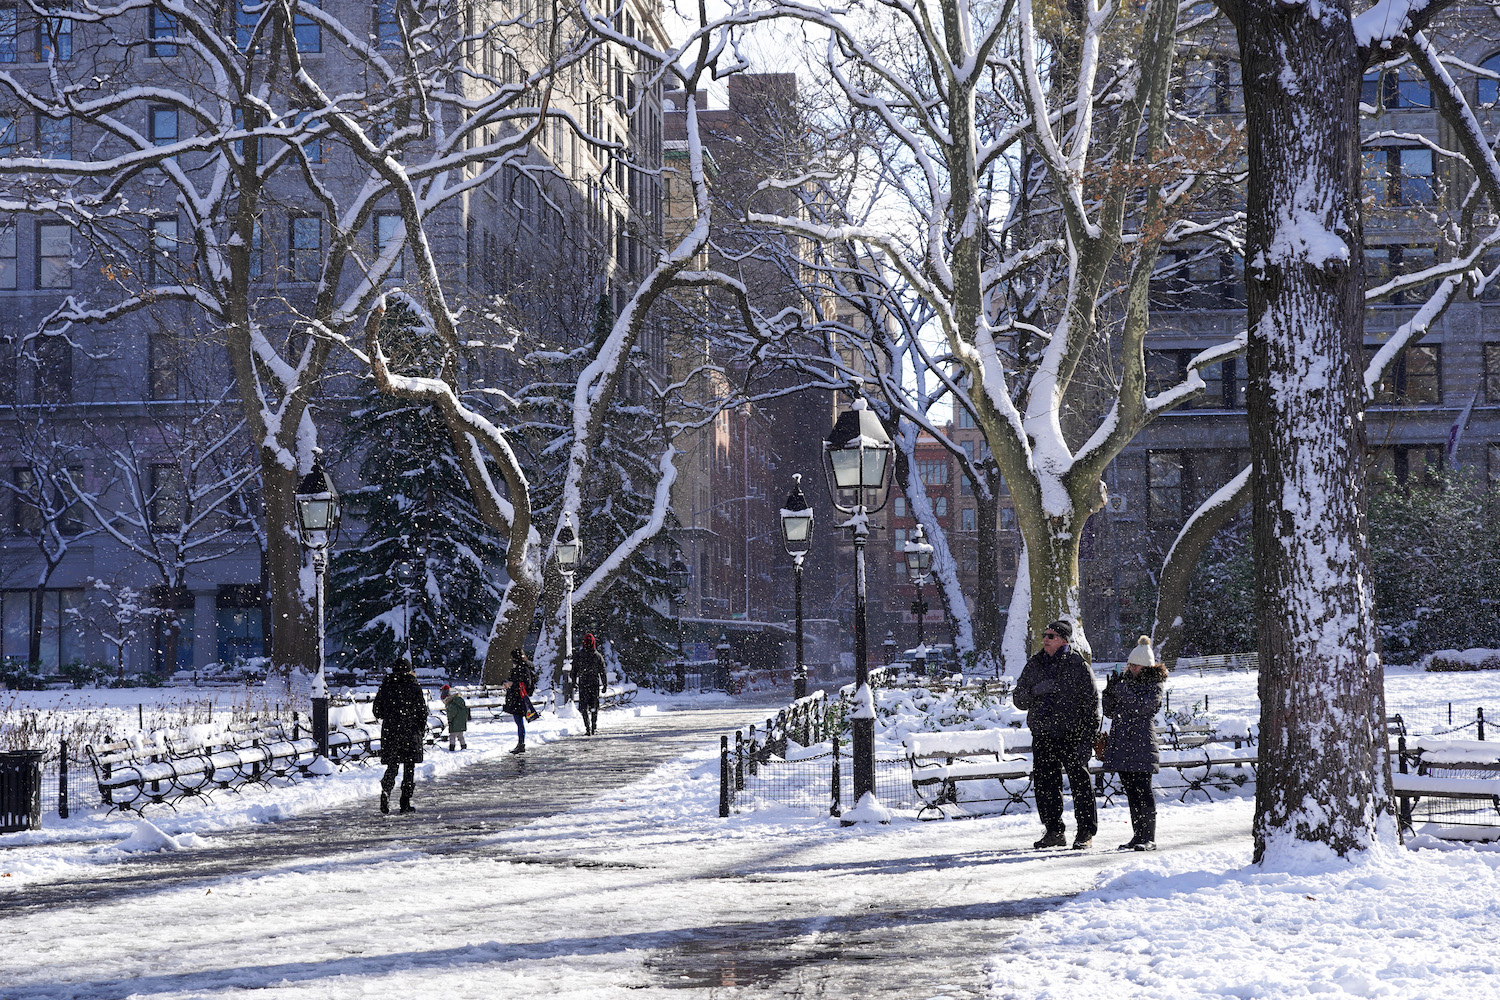 Pedestrians dressed in heavy jackets walk on the east side of Washington Square Park covered in snow.